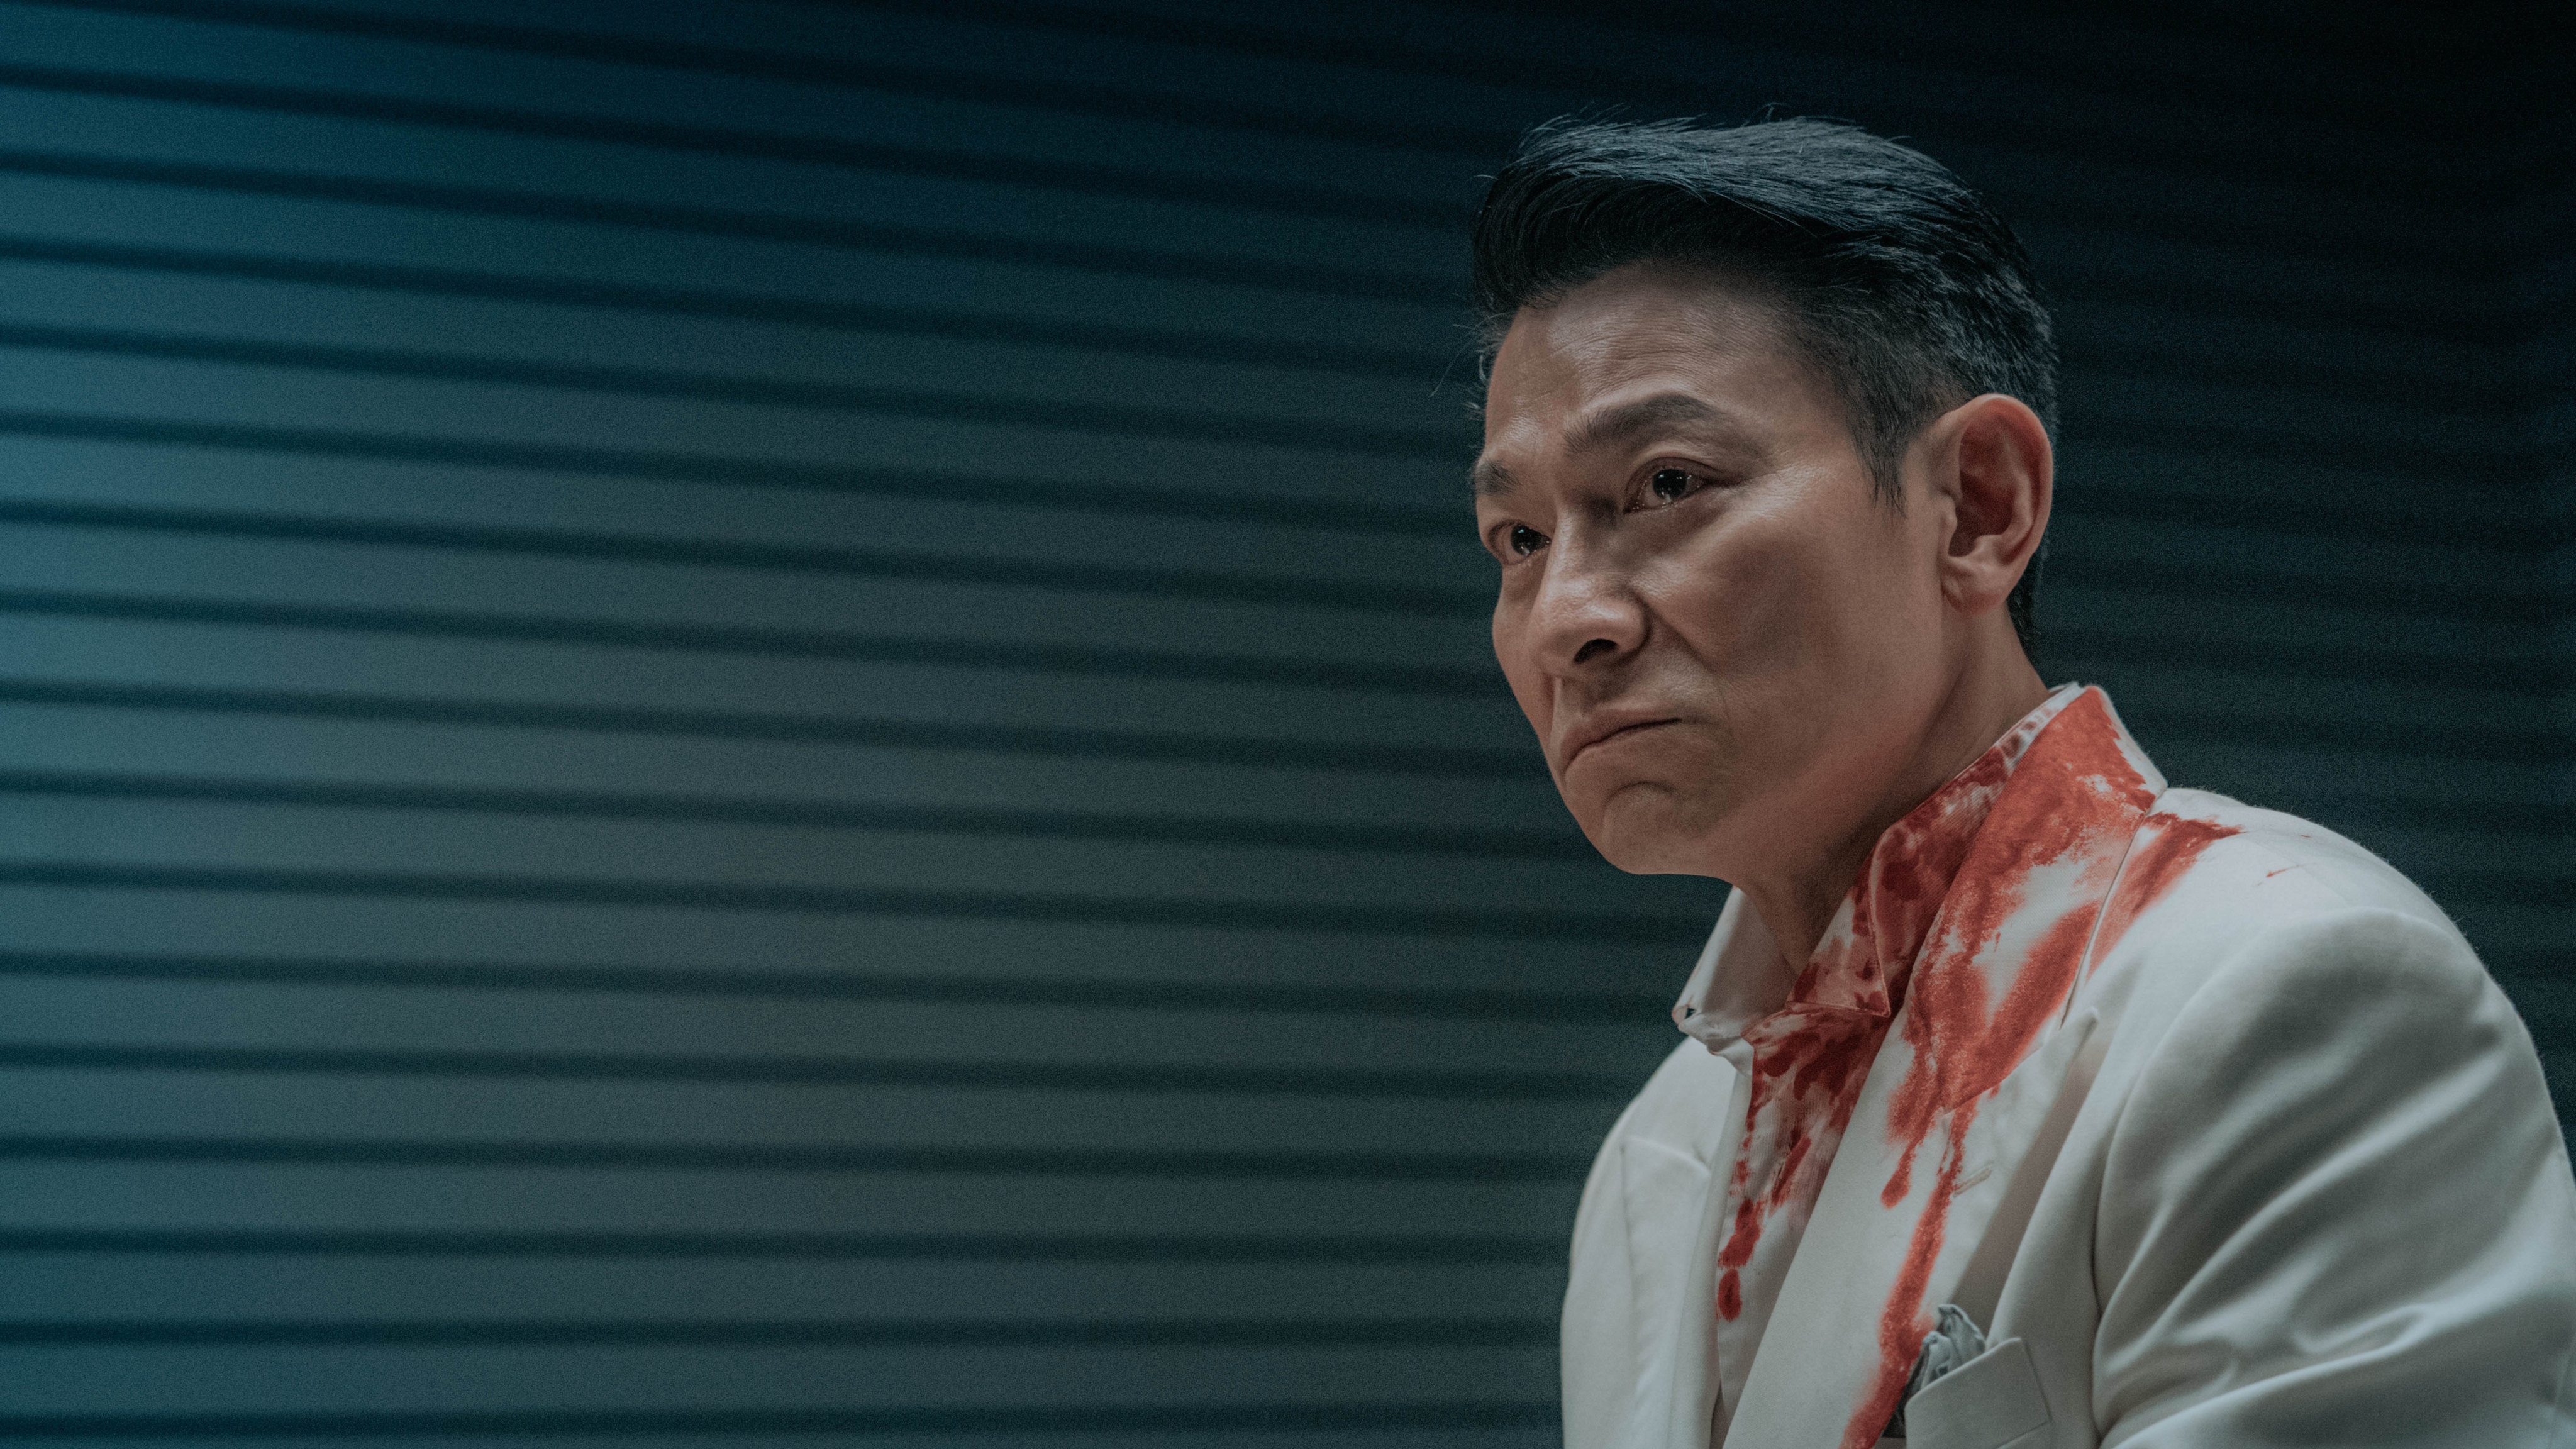 Andy Lau in a still from “I Did It My Way” (category: IIB, Cantonese), co-starring Lam Ka-tung and Eddie Peng, and directed by Jason Kwan